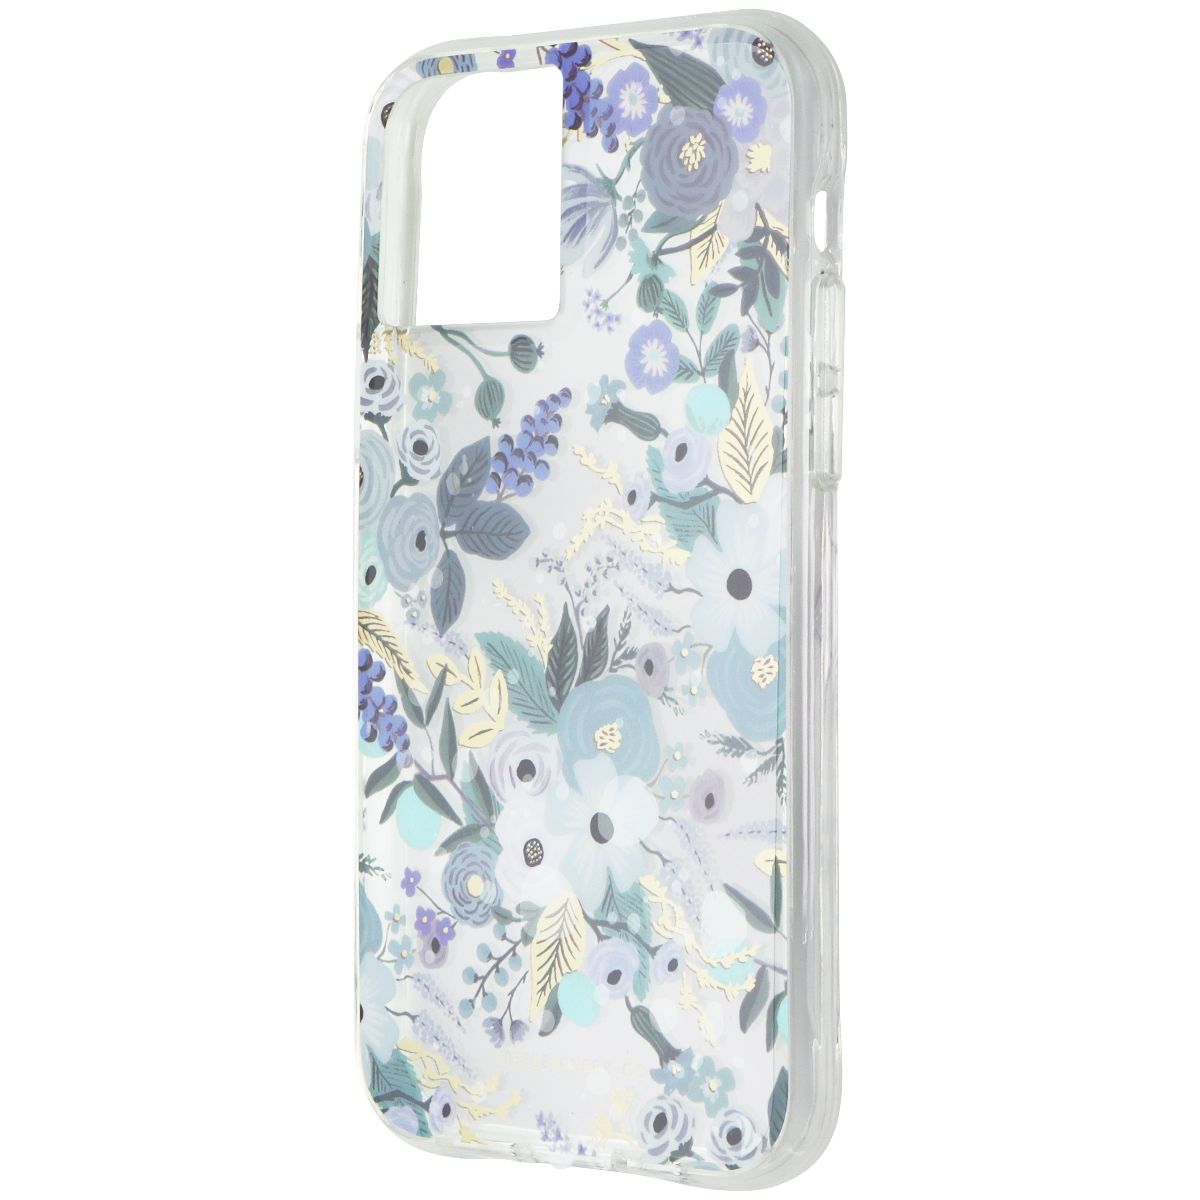 Rifle Paper Co. Case for Apple iPhone 11 Pro - Garden Party Blue